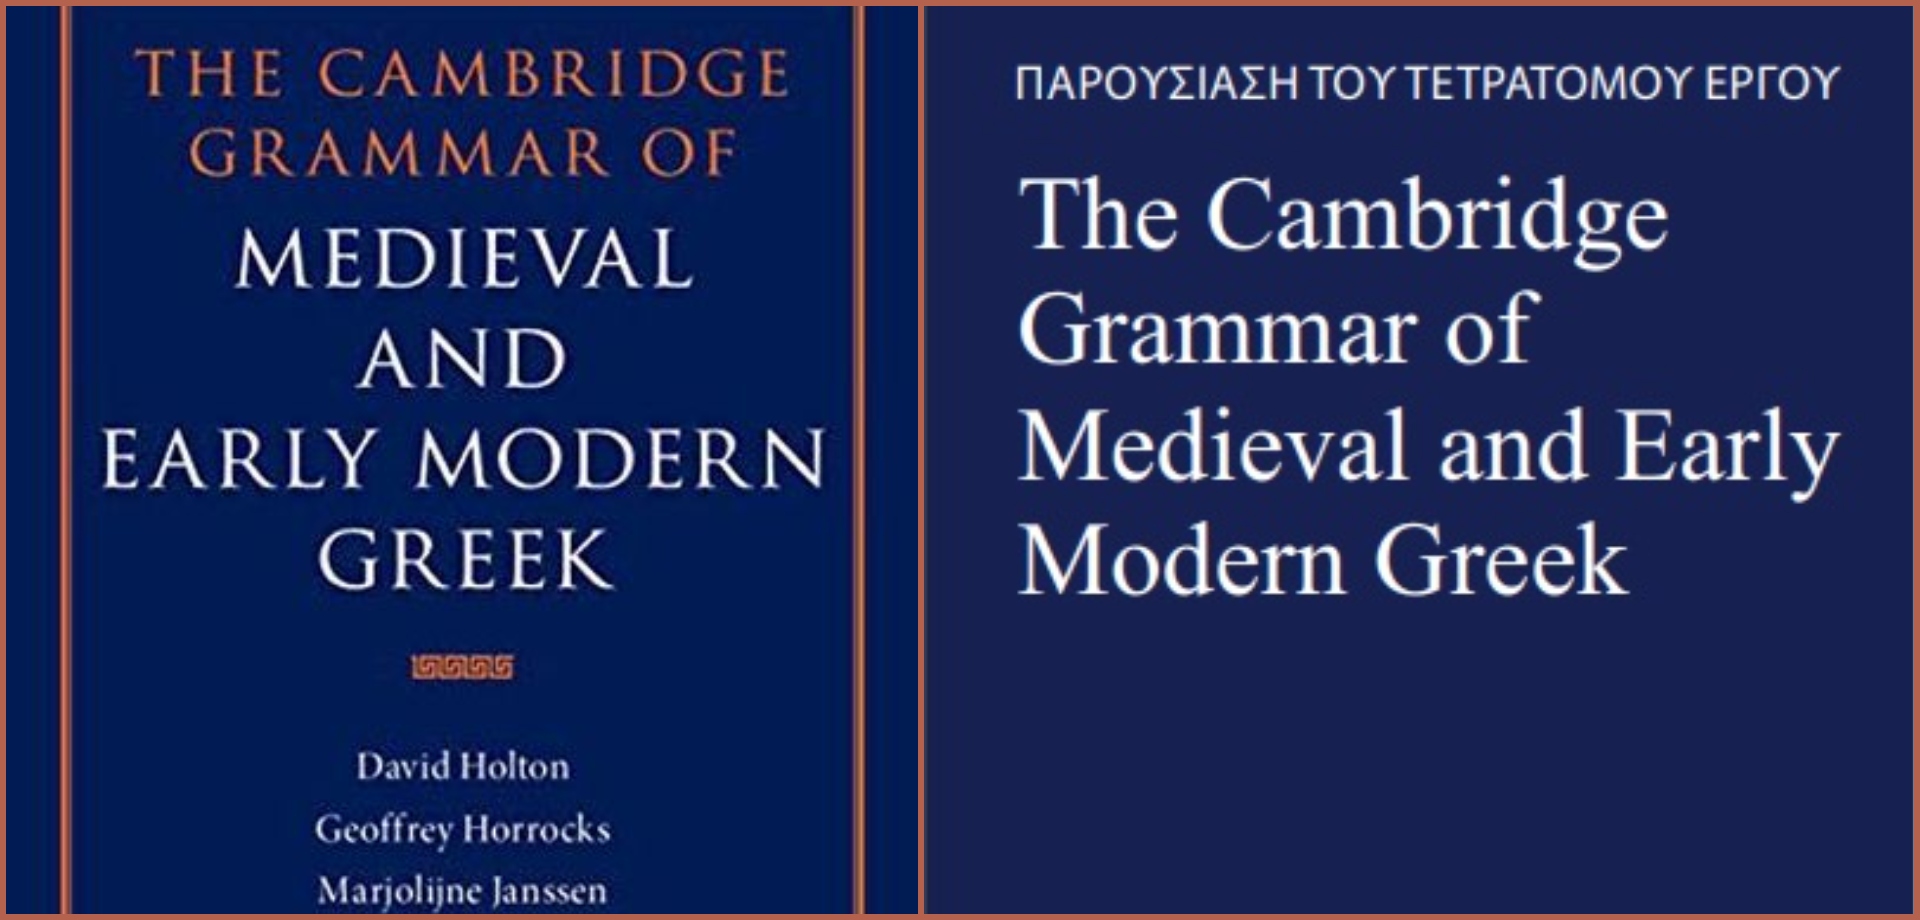 The Cambridge Grammar of Medieval and Early Modern Greek